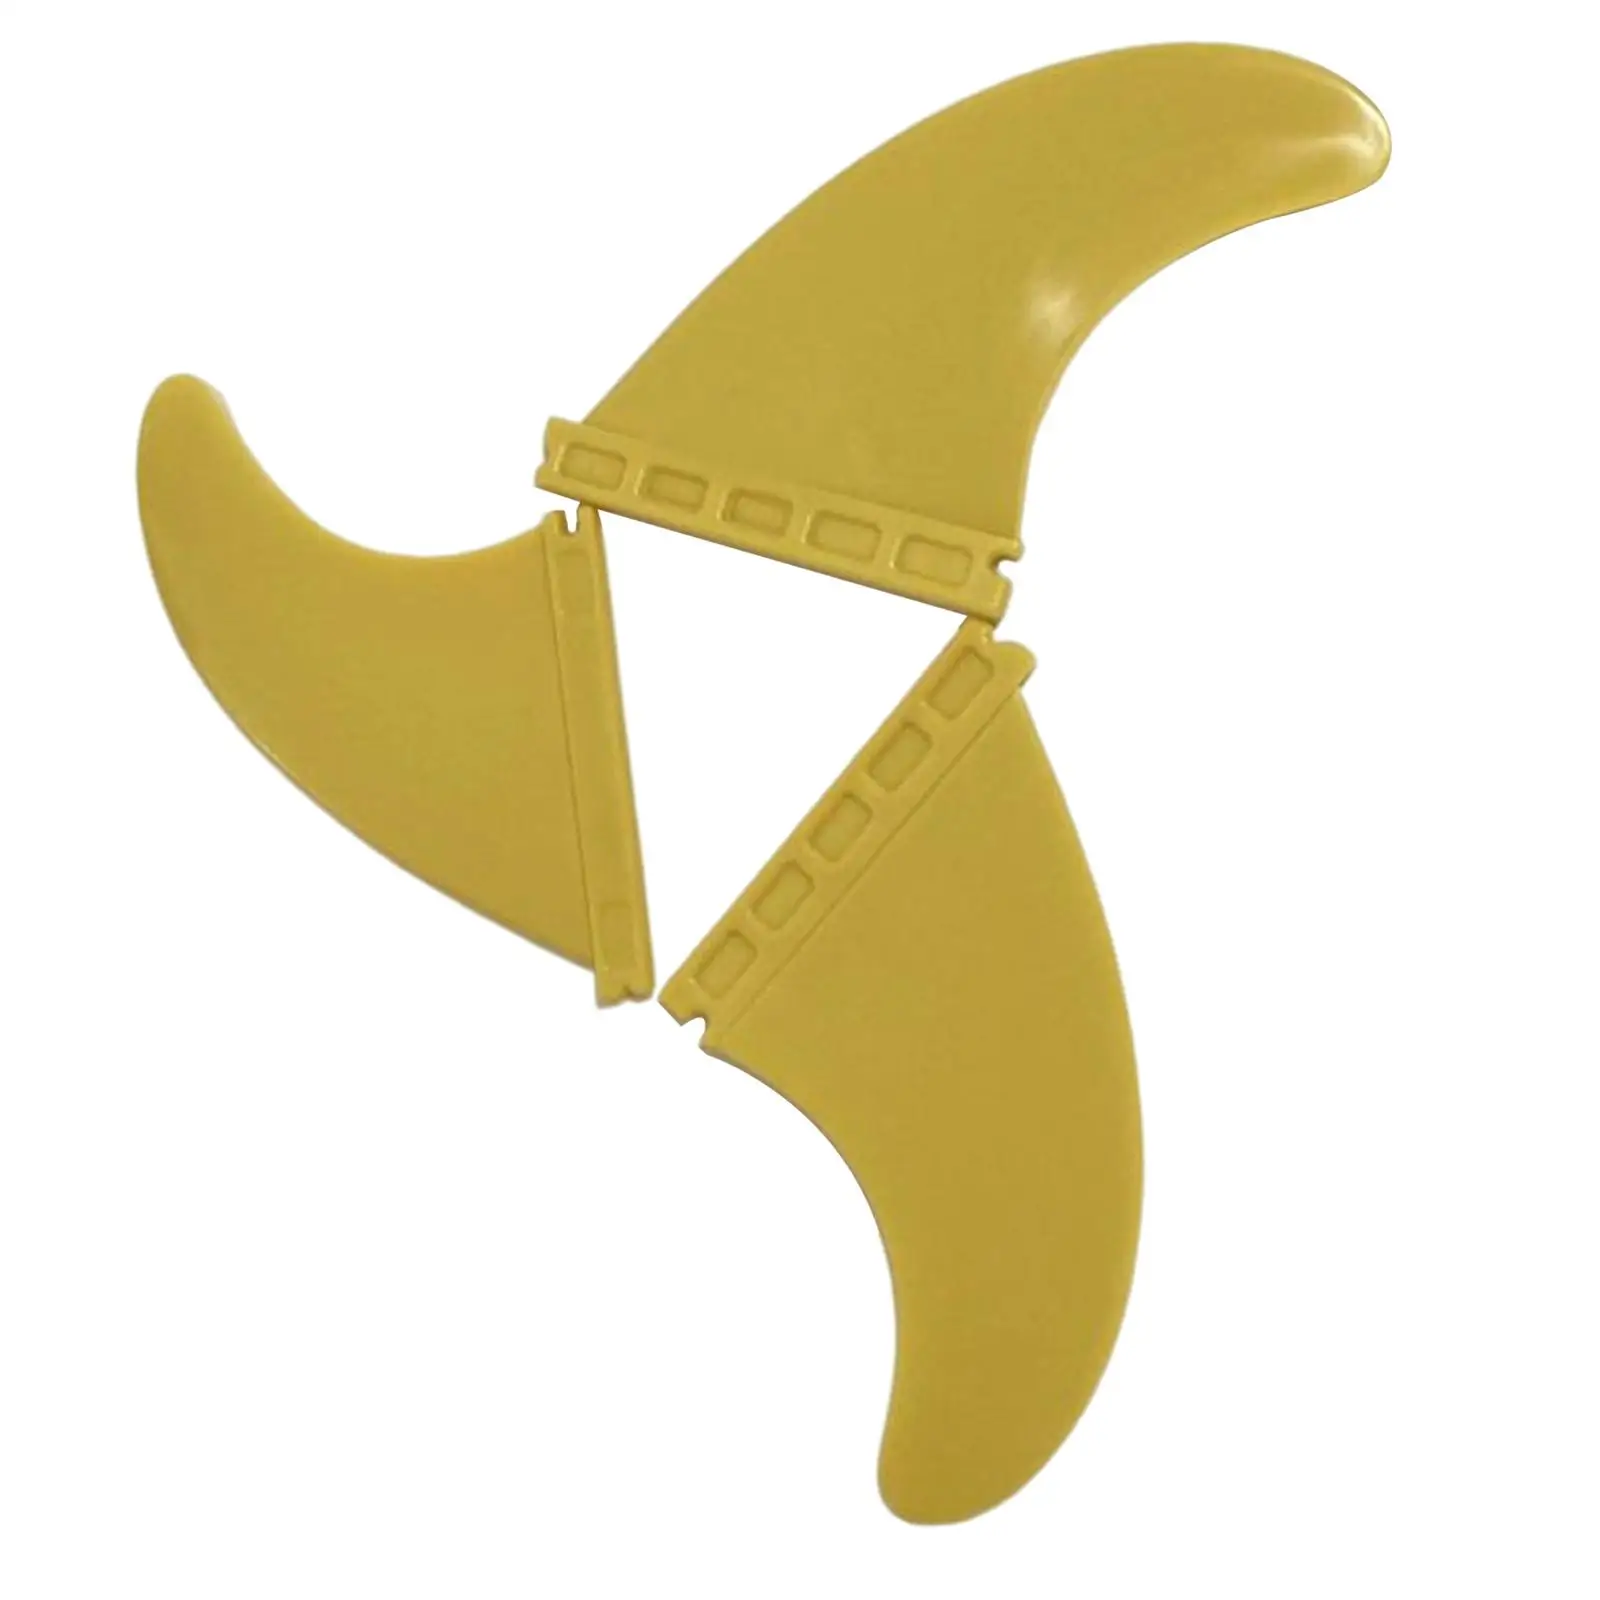 Stand up Paddle Board Fin Durable Tail Rudder for Longboard Surfboard Repair